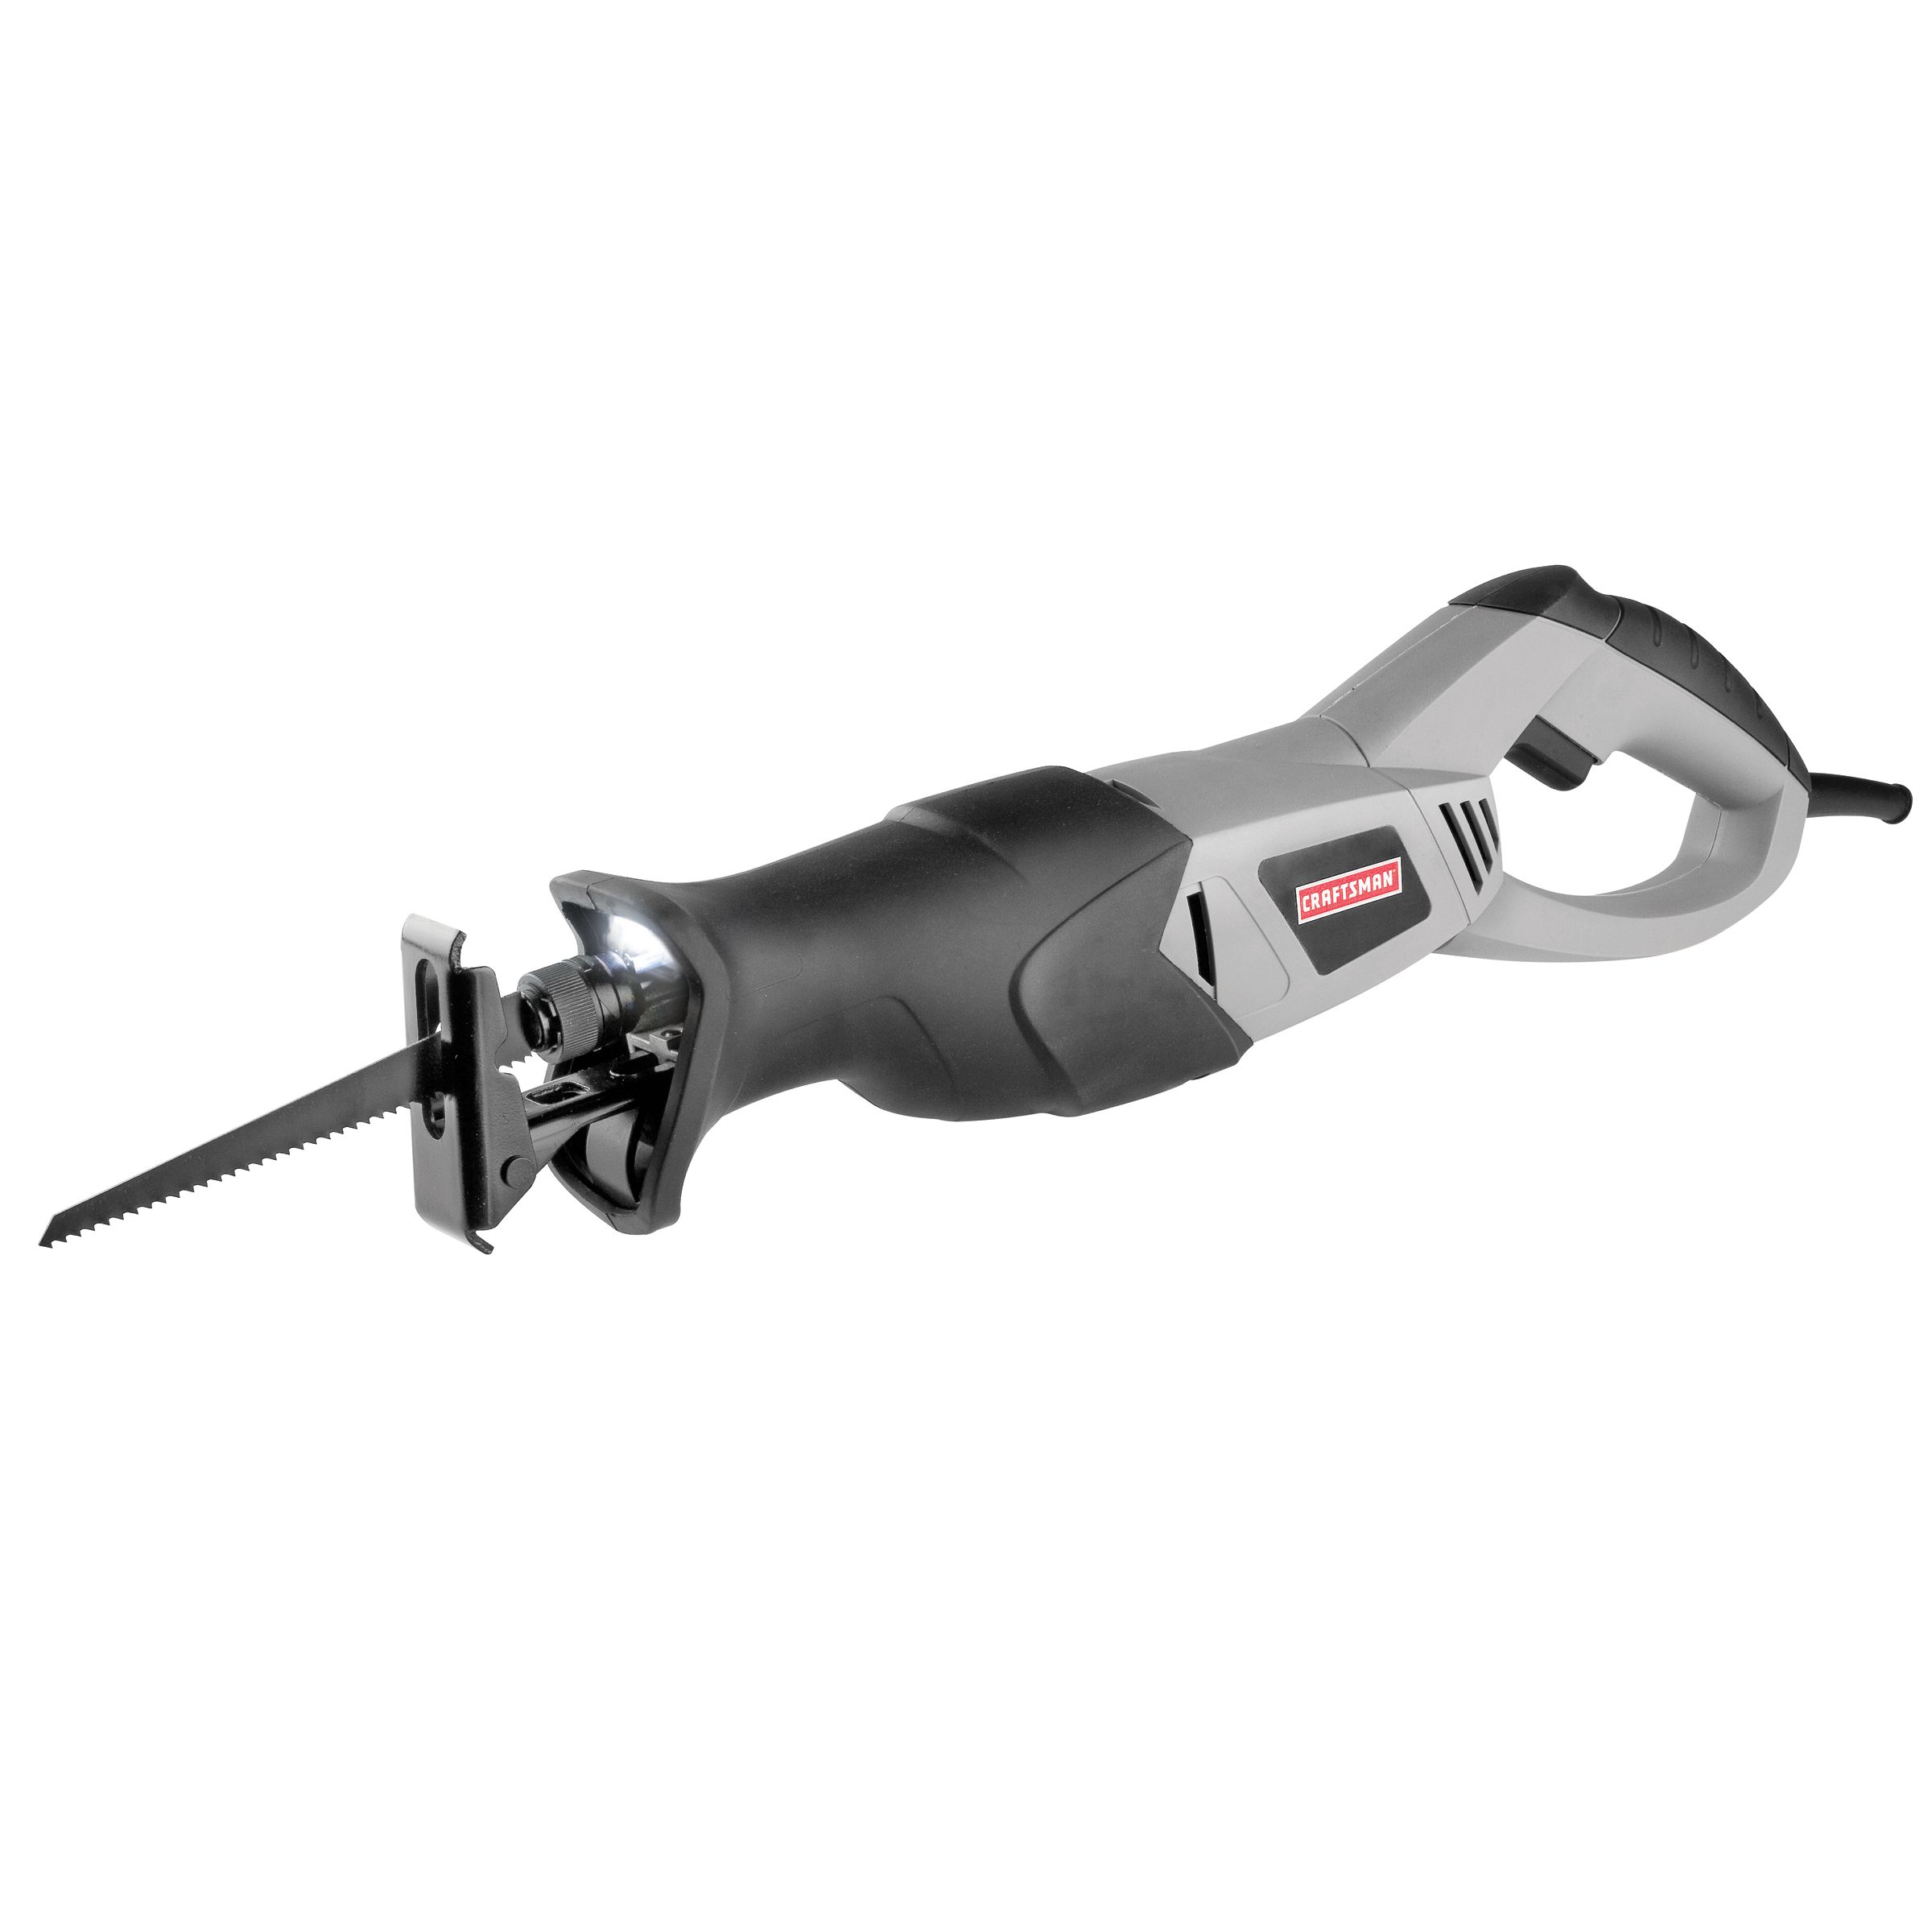 Craftsman 6-Amp, 2,700 RPM Corded Reciprocating Saw—$29.99!